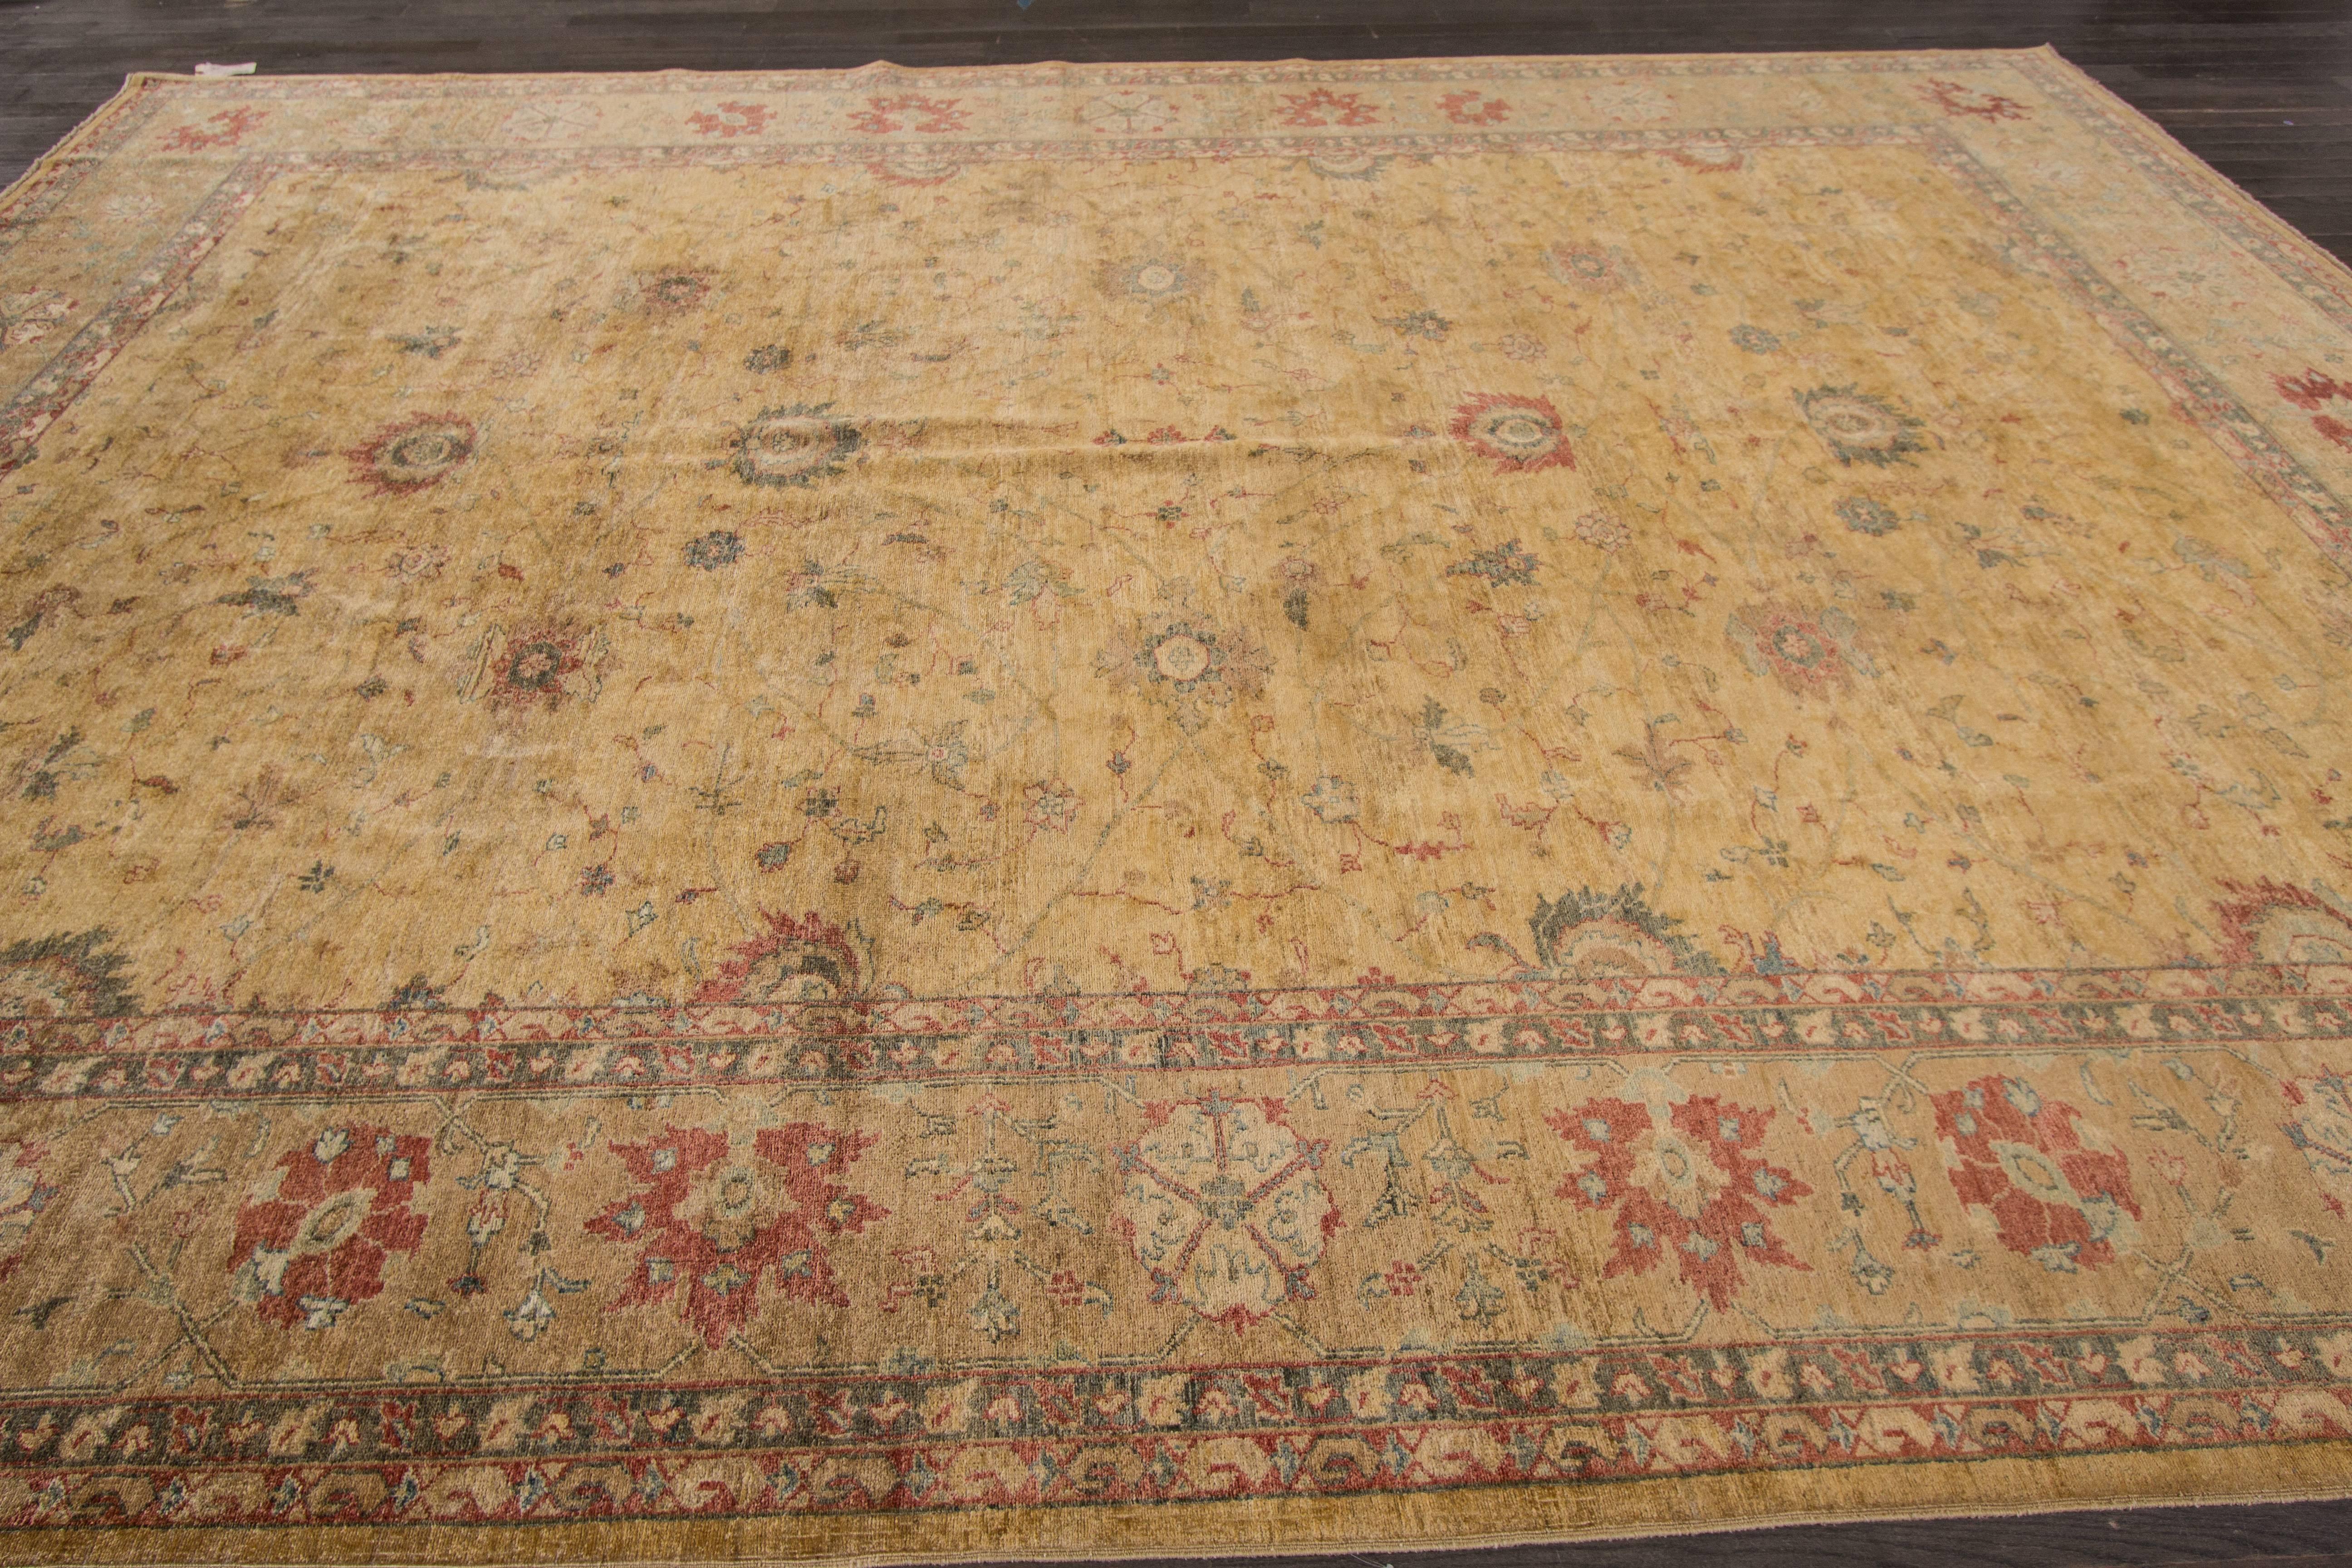 A hand-knotted Peshawar rug with a geometric design on a beige field. Accents of red, blue and ivory throughout the piece. This rug measures 10' x 14'.